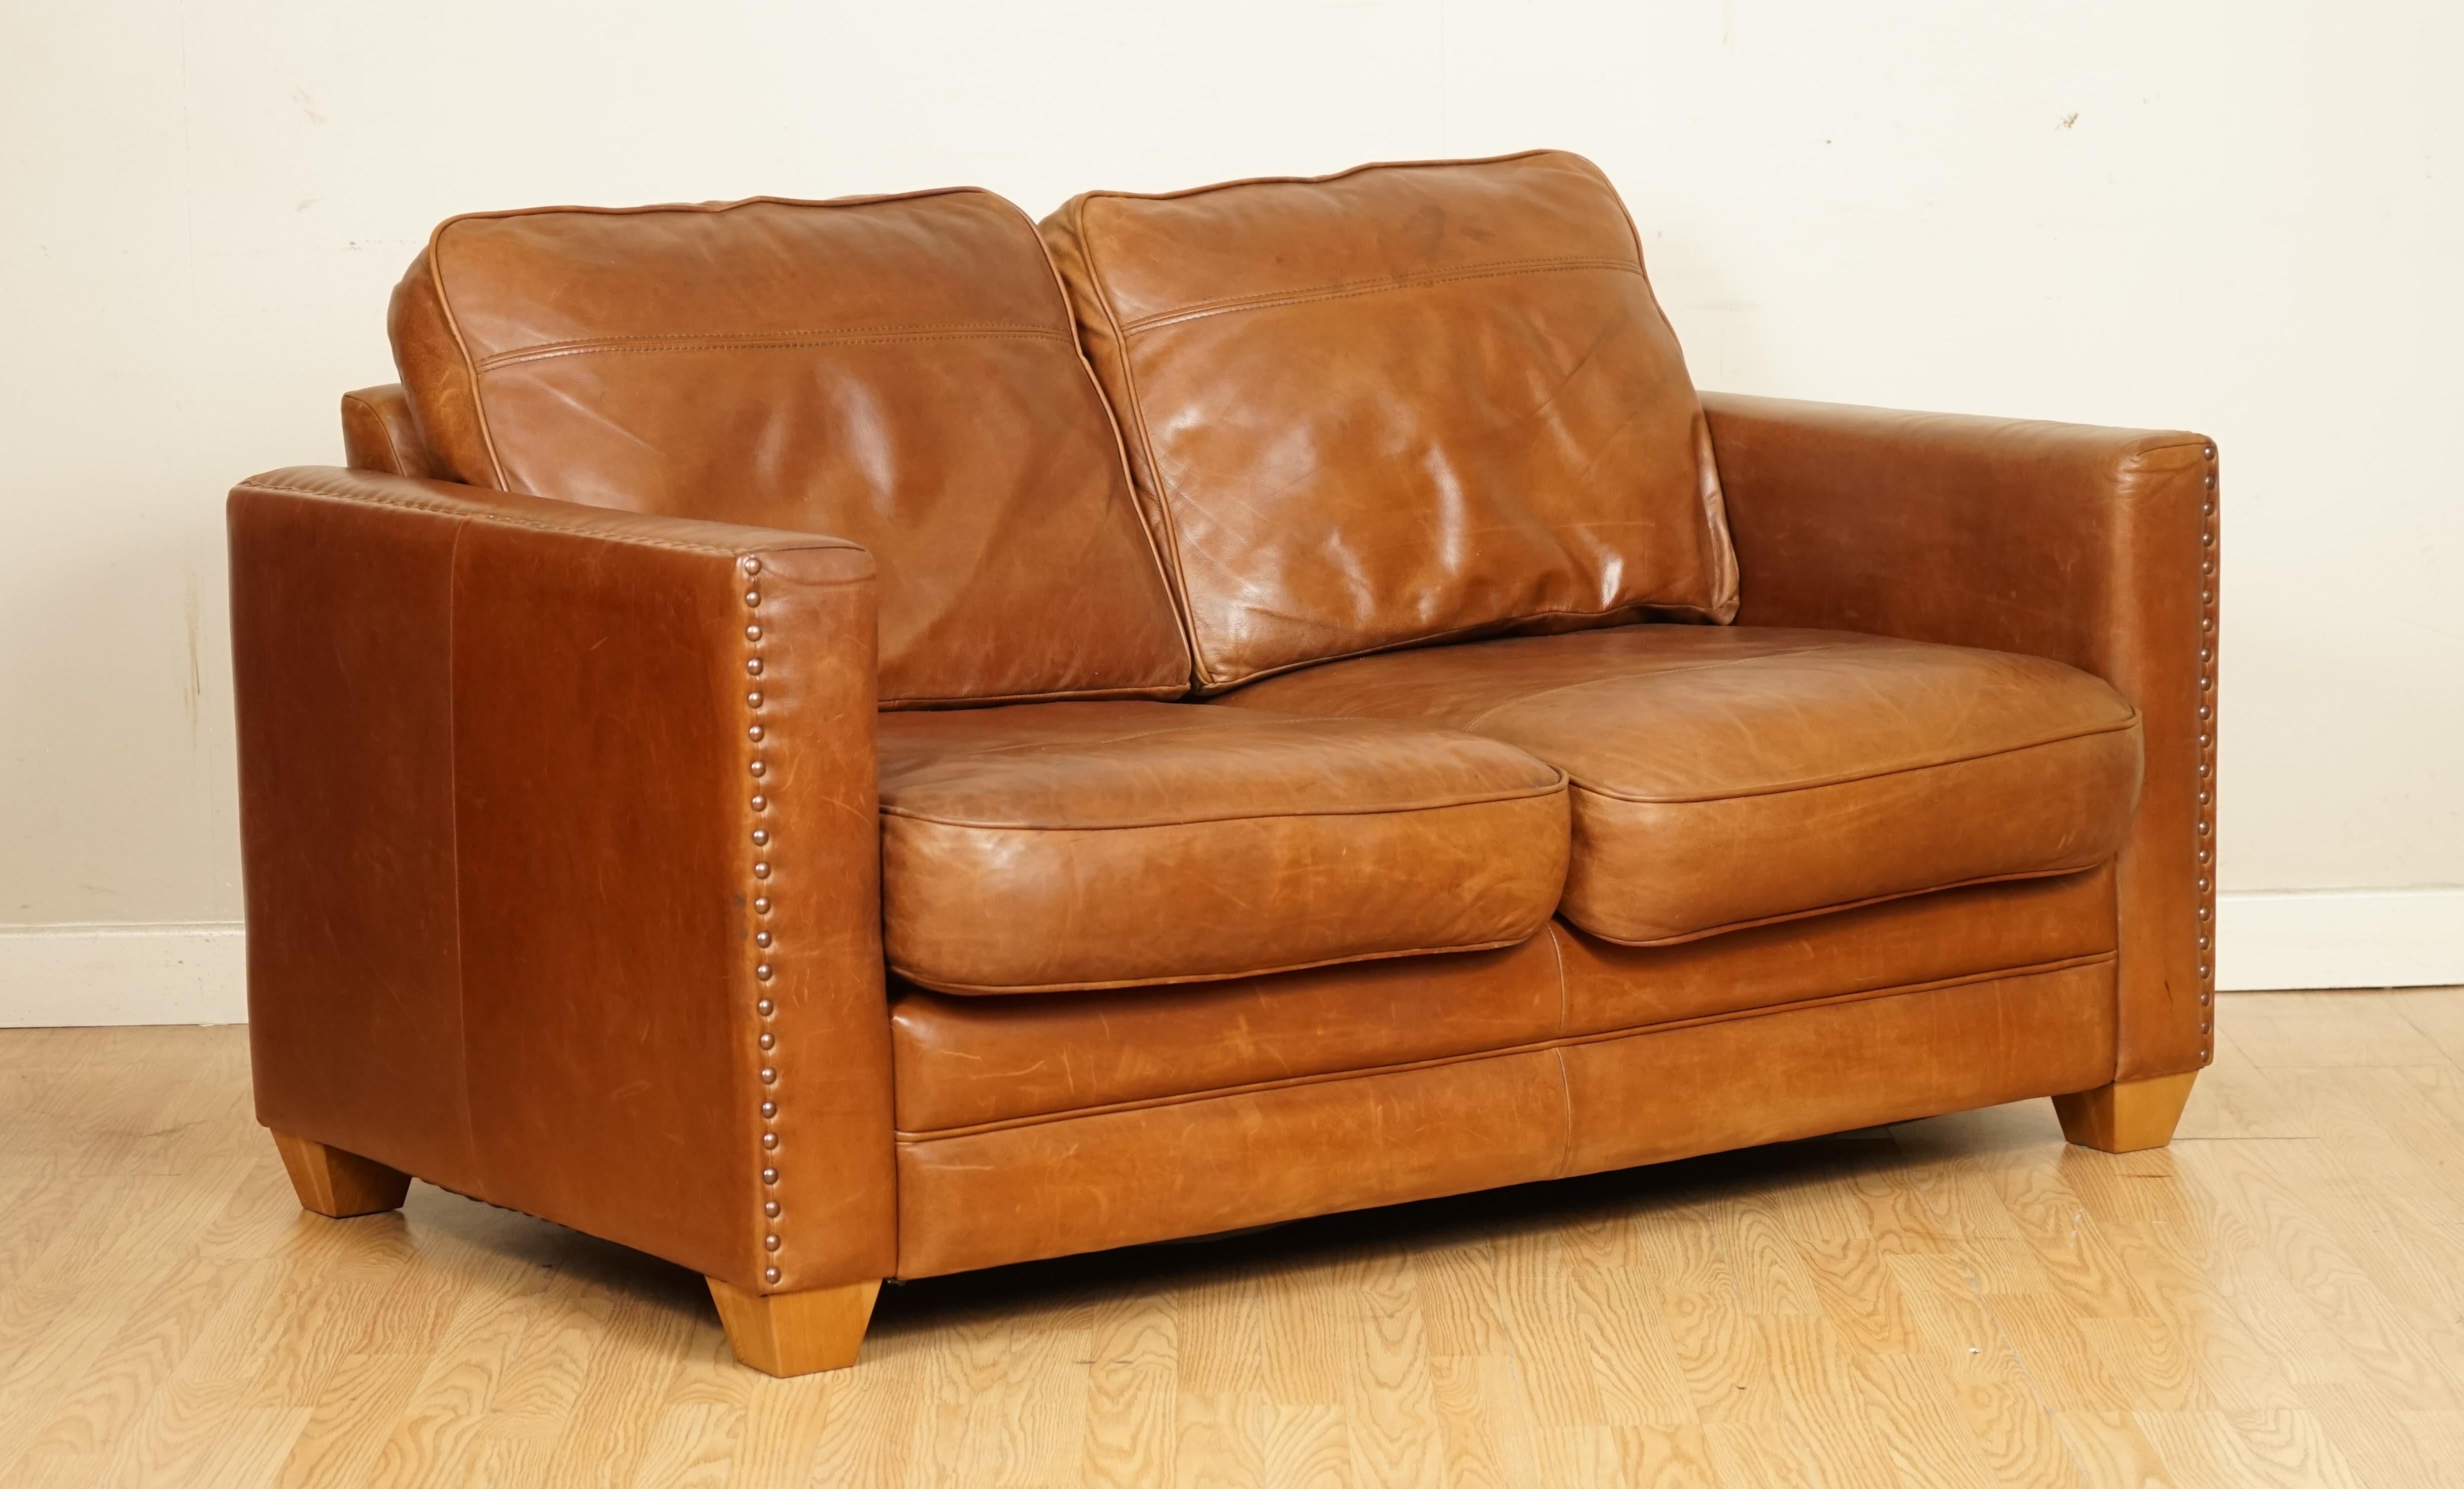 We are so excited to present to you this beautiful compact brown leather sofa.

We have lightly restored this by giving it a hand clean all over, hand waxed and hand polish. 

Please carefully look at the pictures to see the condition before